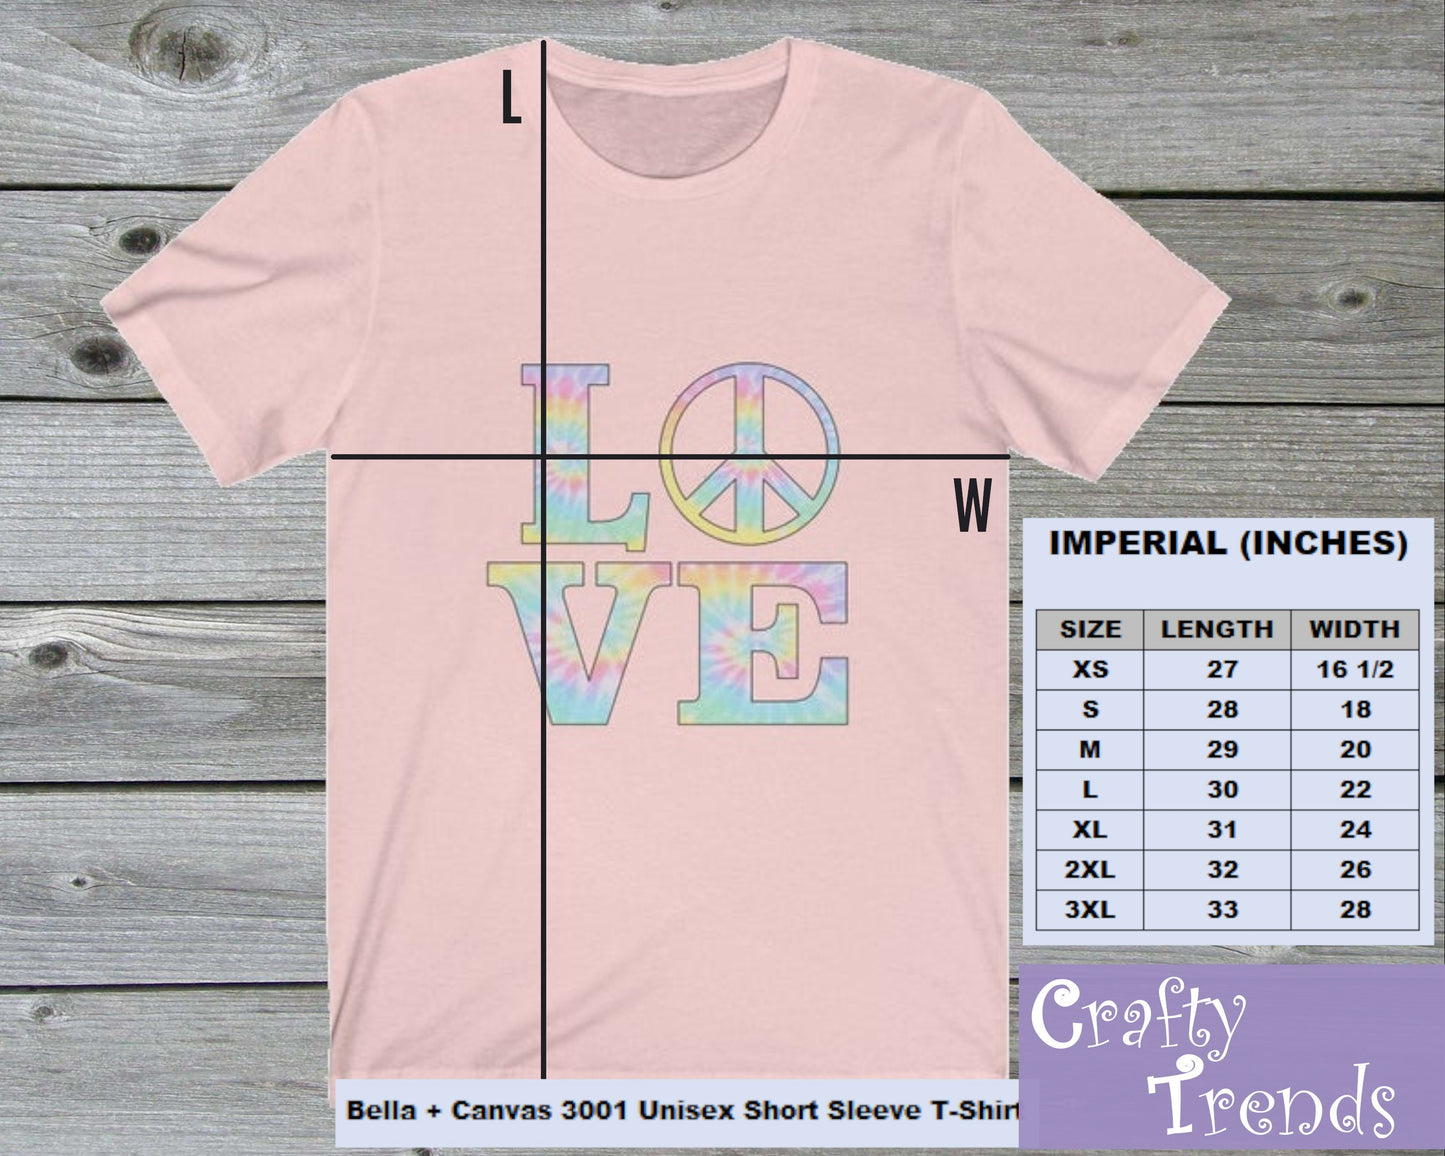 Love and Peace Symbol - Unisex Jersey Short Sleeve Tee, Pastel Love,Pastel Peace,Girls T-Shirt,Womens Shirt,Gift for Women,Gift for GIrls